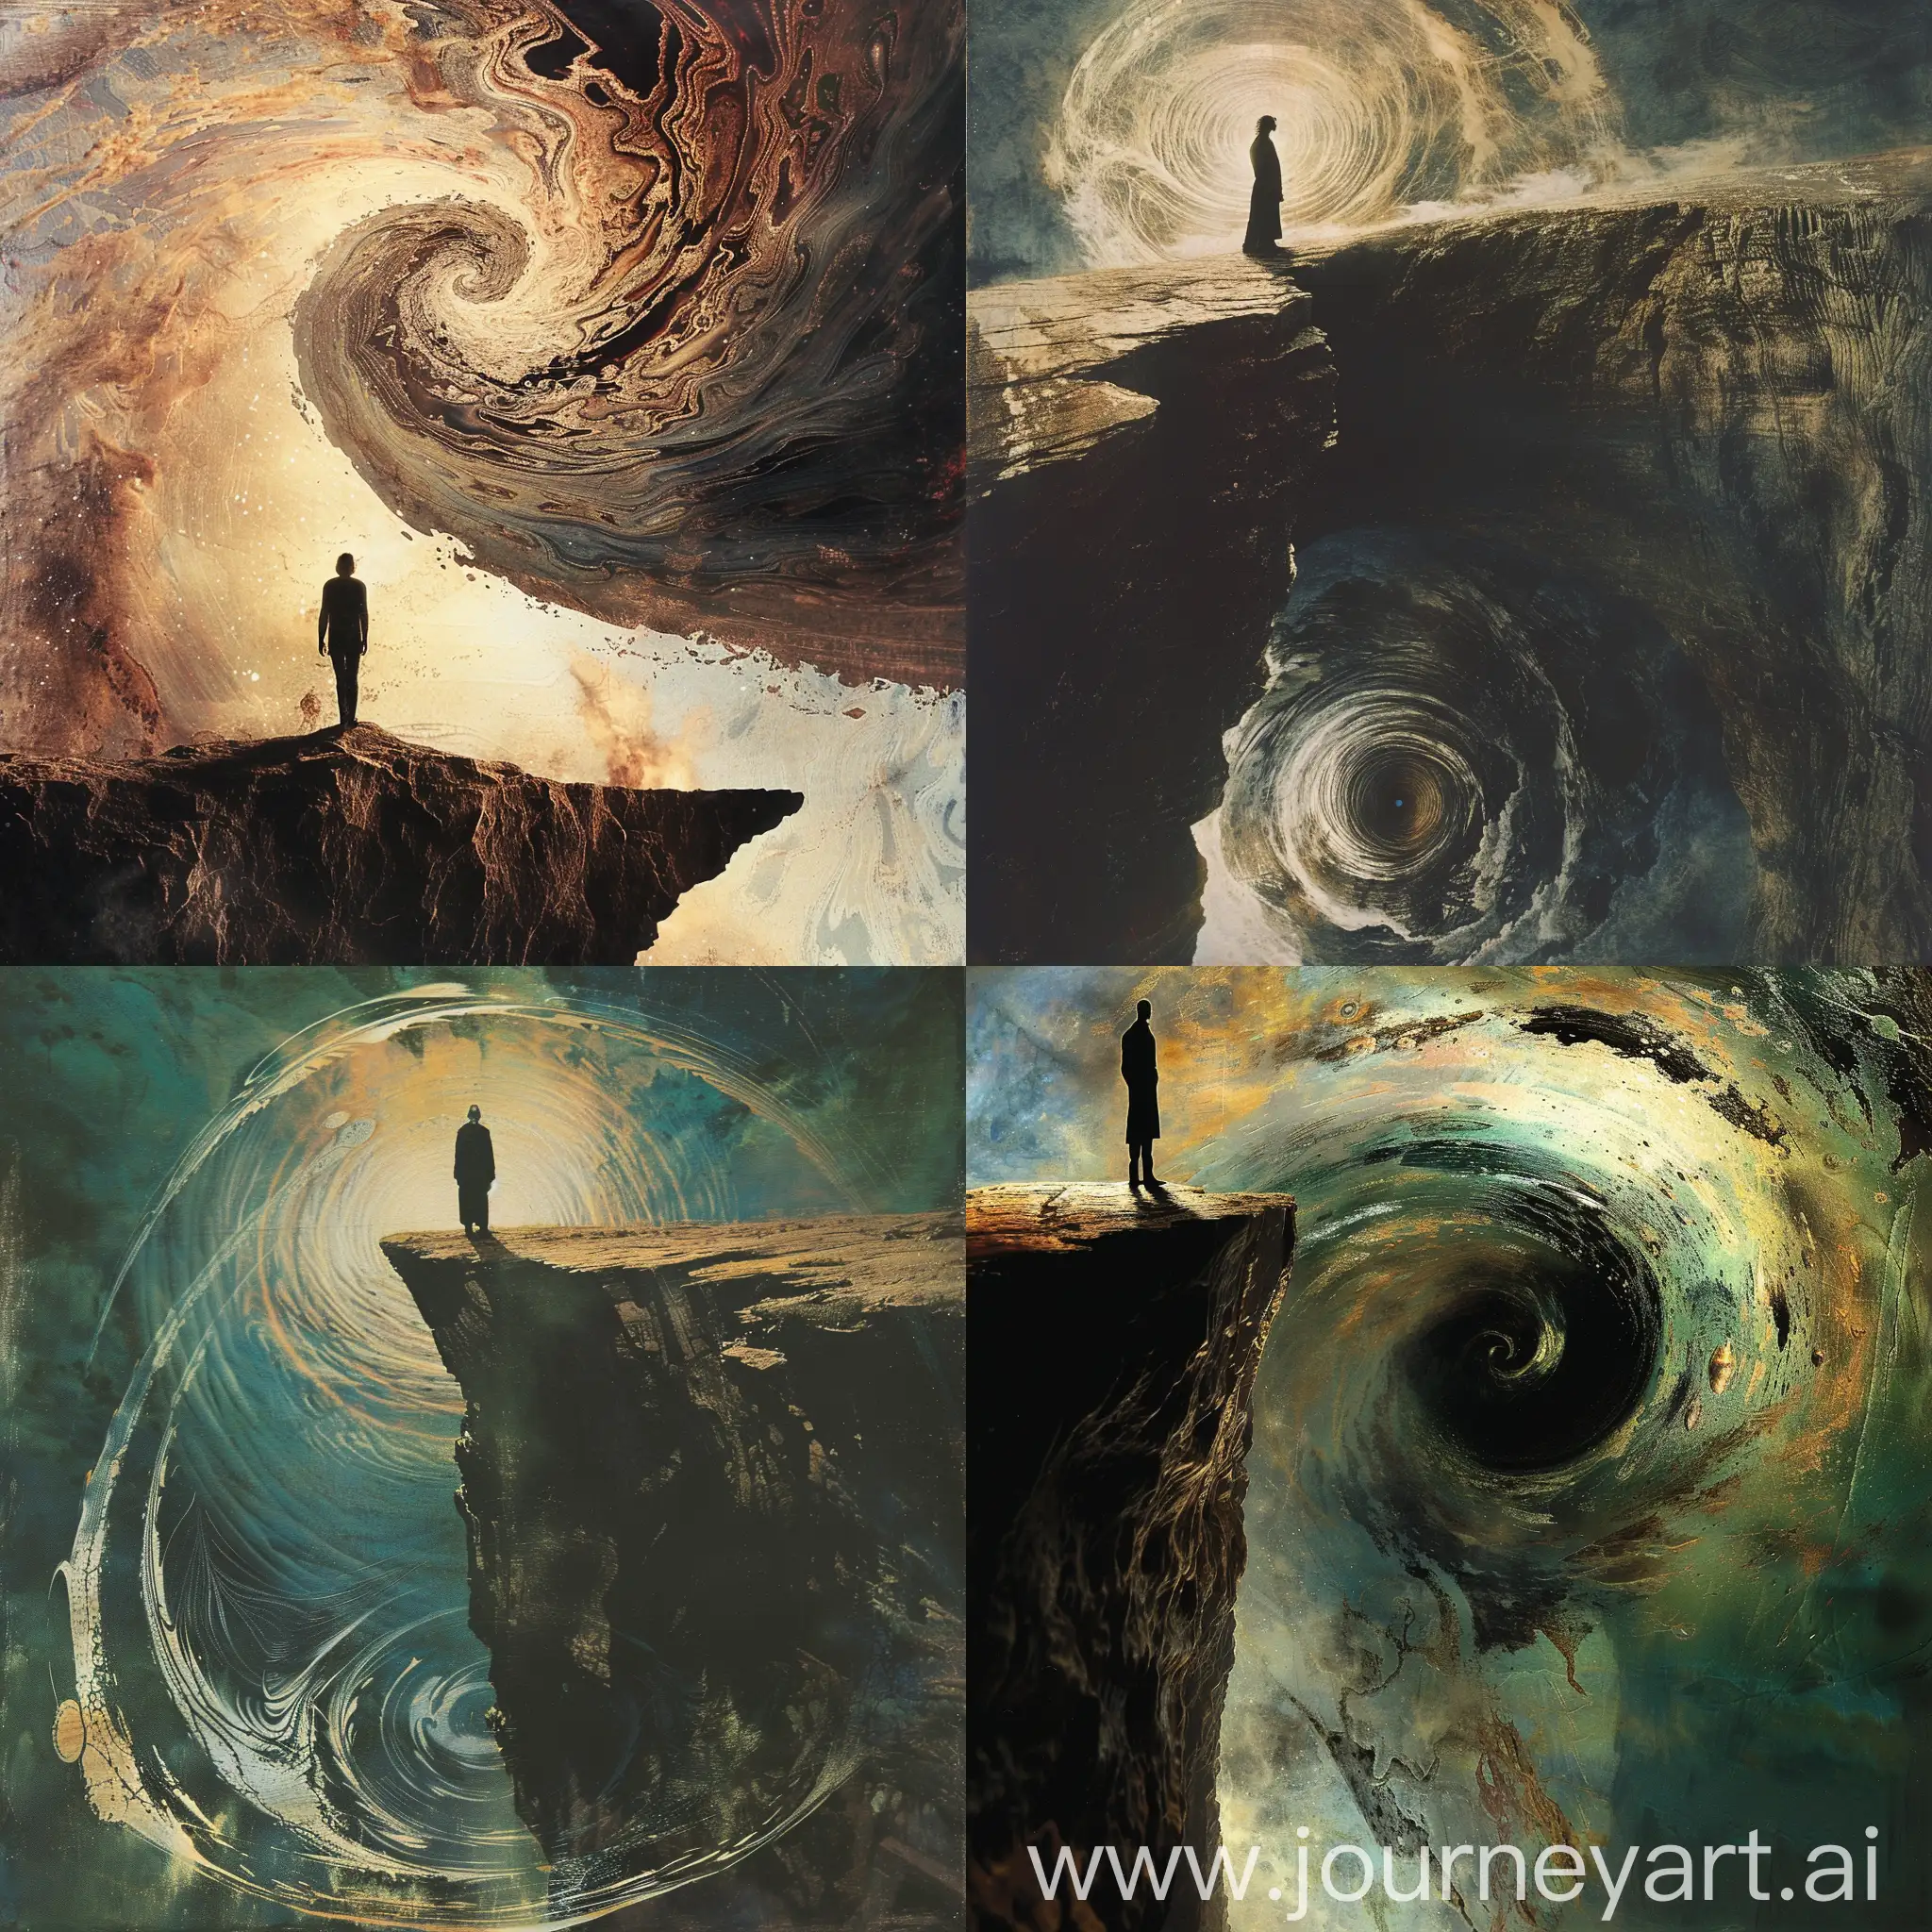 The album cover features a surrealistic scene where a shadowy figure stands at the edge of a cliff, staring out into a swirling vortex of light and darkness. The figure's reflection in the abyss below is distorted, symbolizing the complex themes of paradox, denial, and the contradictions of life and death.